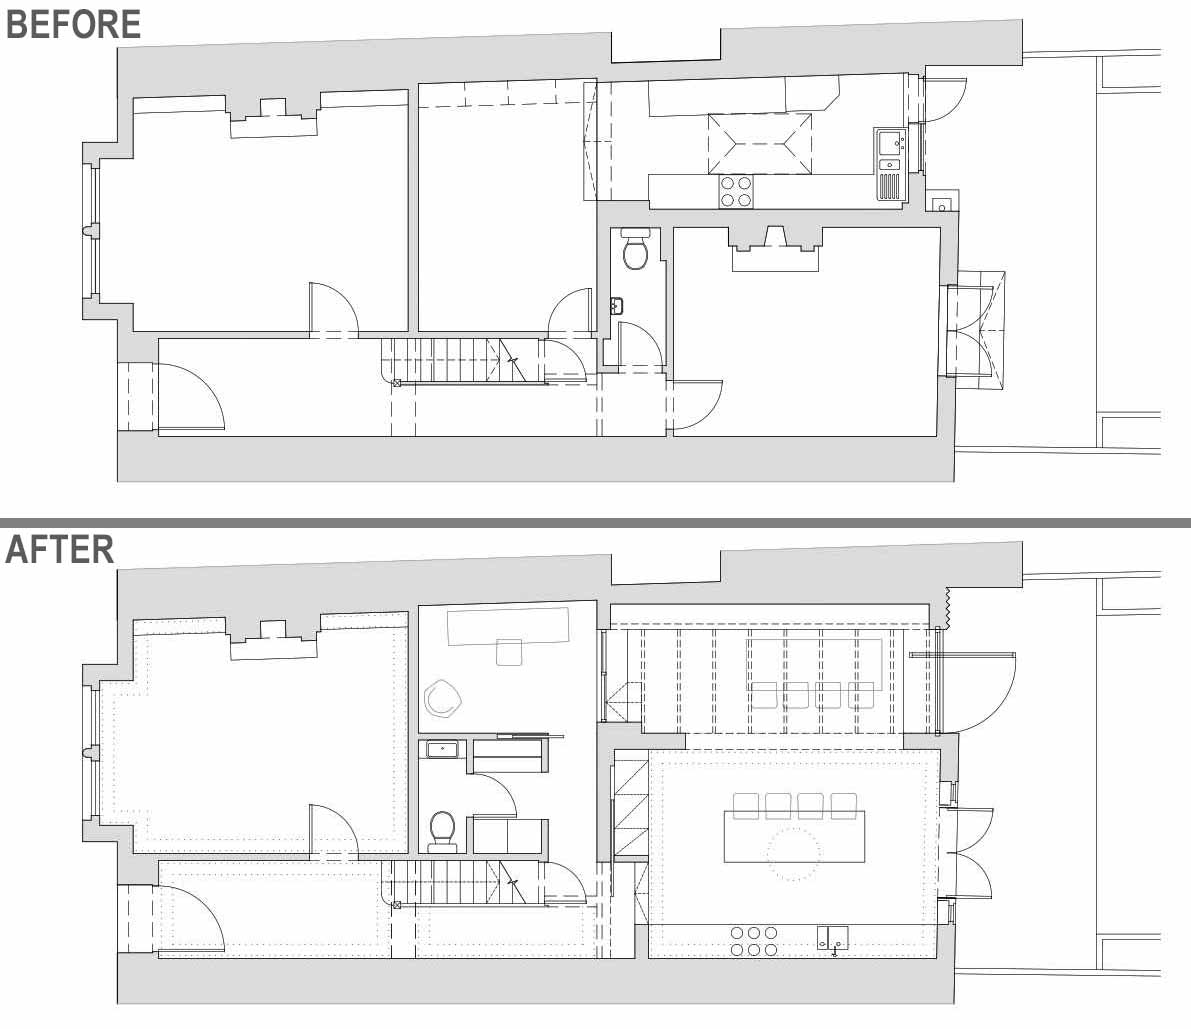 The floor plan of a remodeled side extension for a home in London.